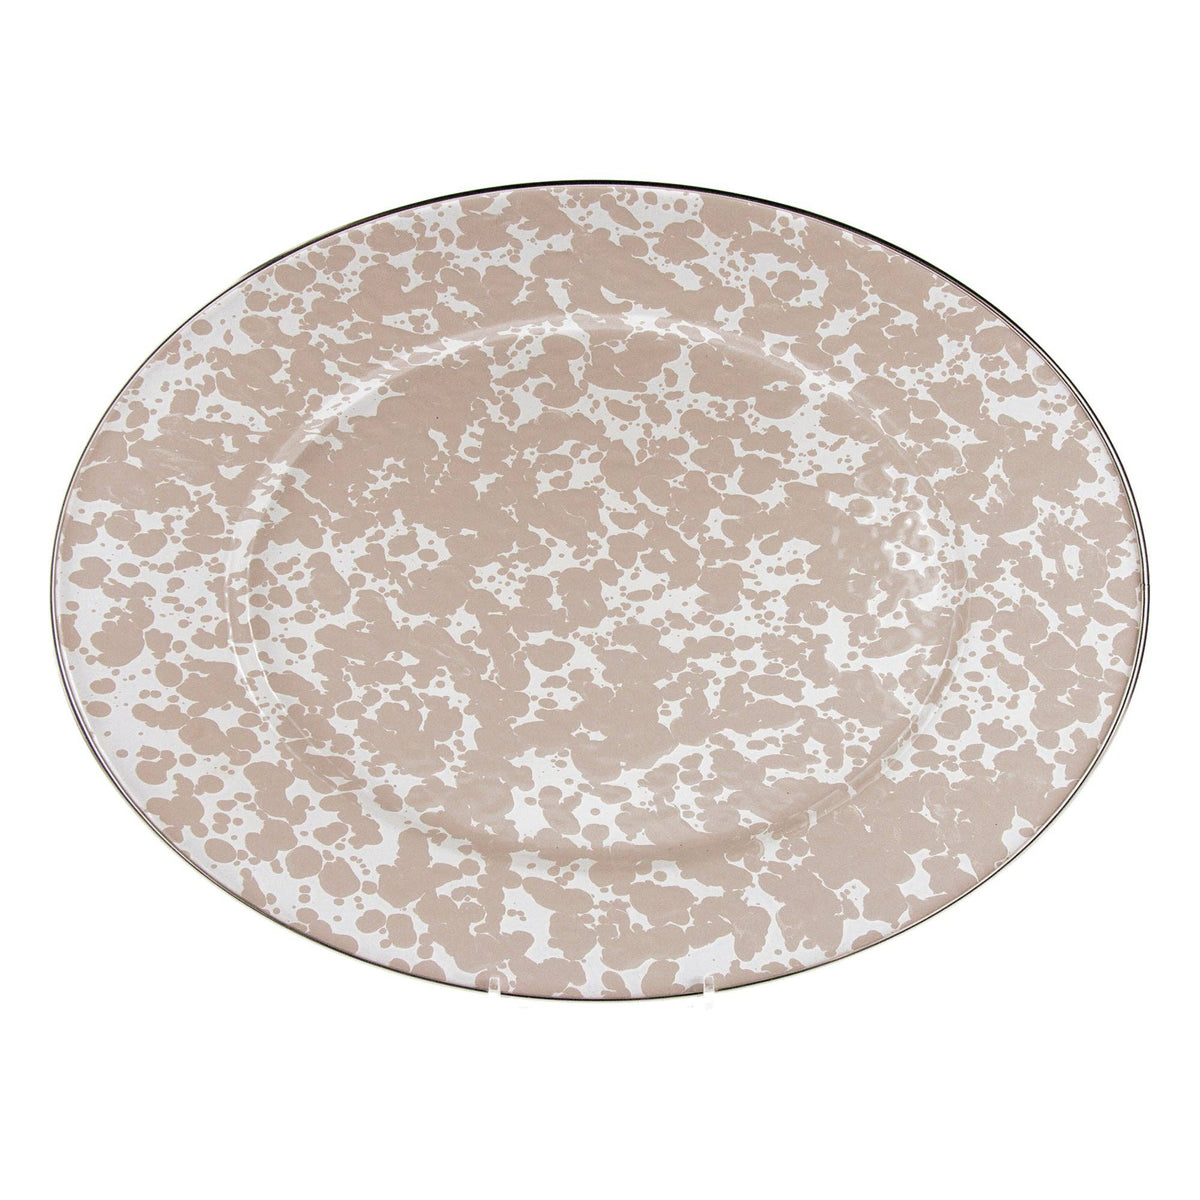 Taupe Swirl Oval Tray - The Preppy Bunny